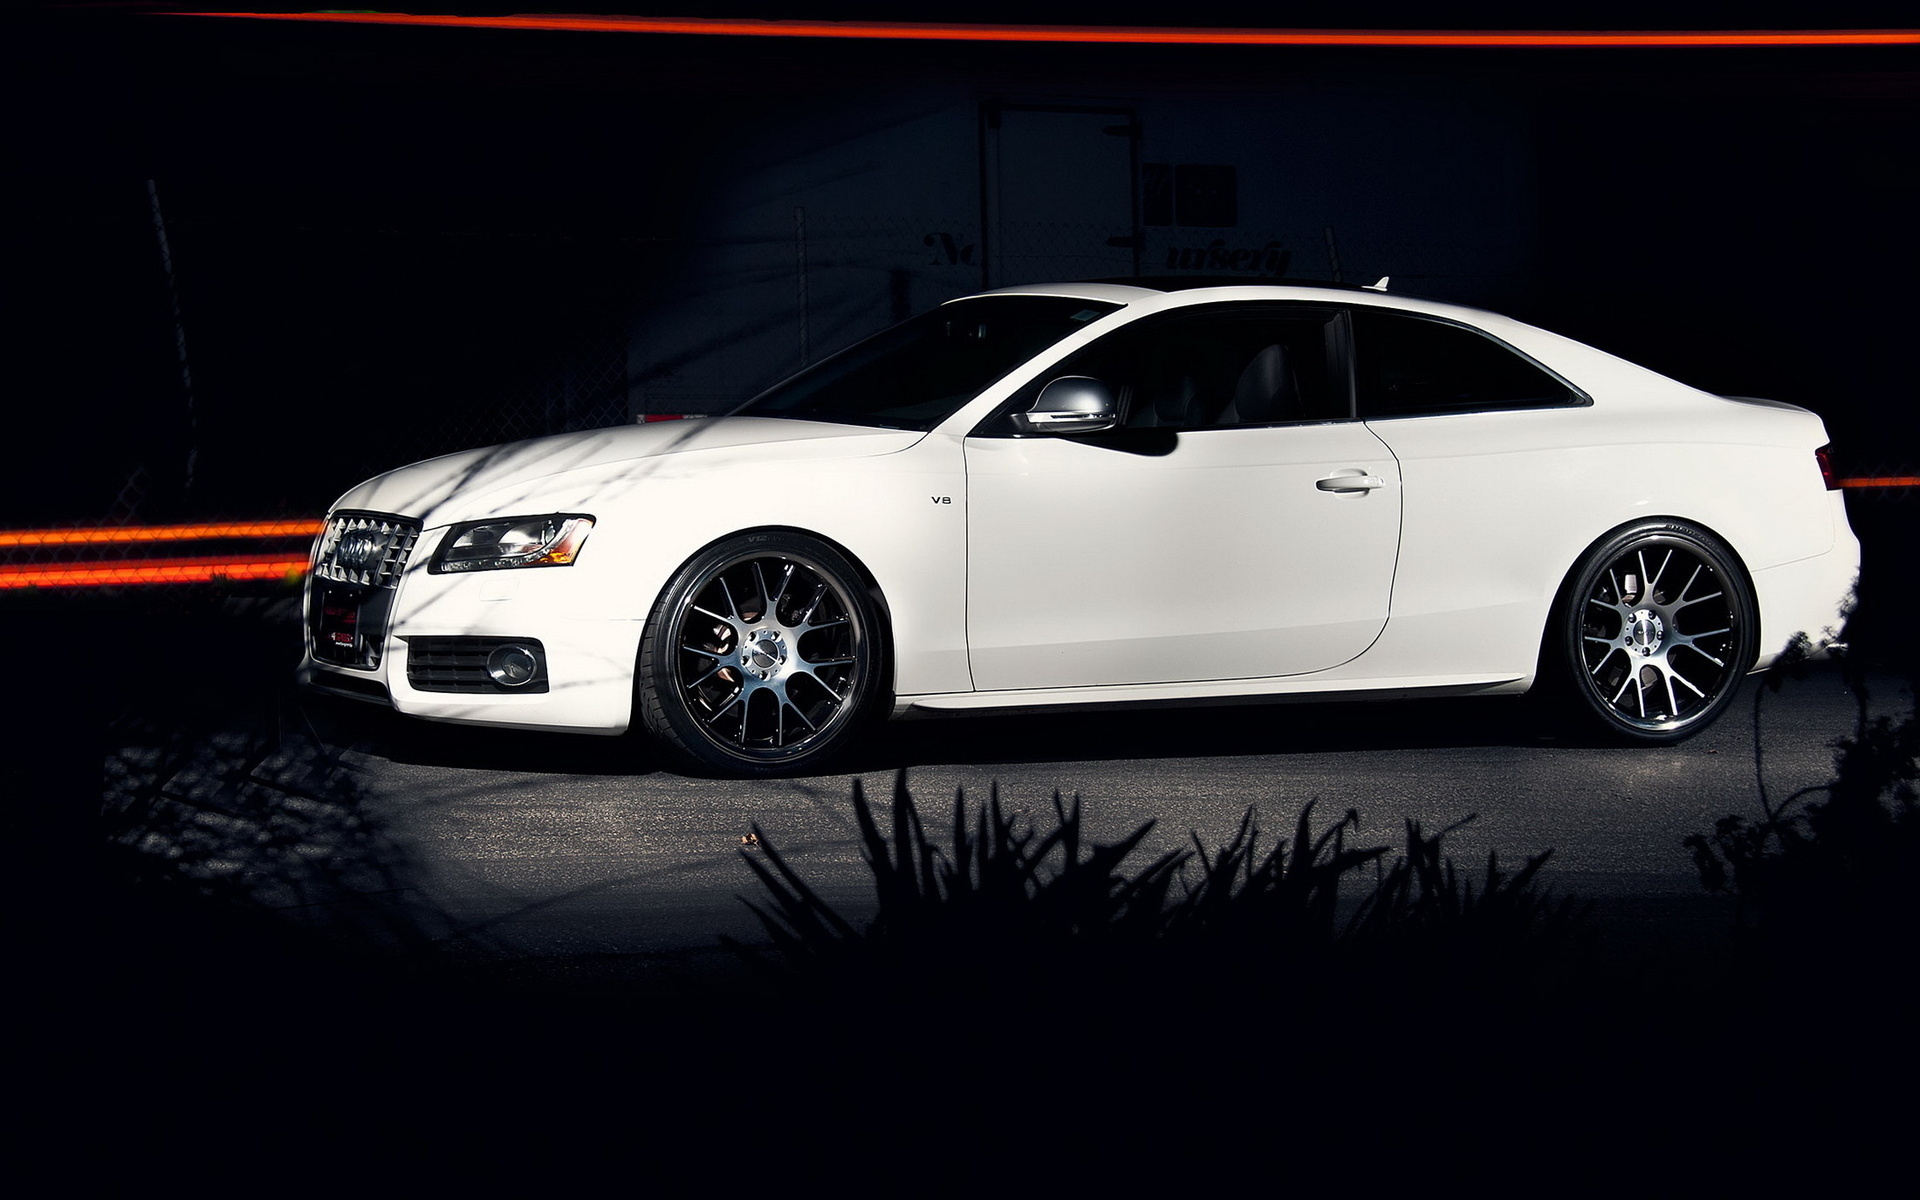 Audi S5 Wallpaper Full HD Pictures